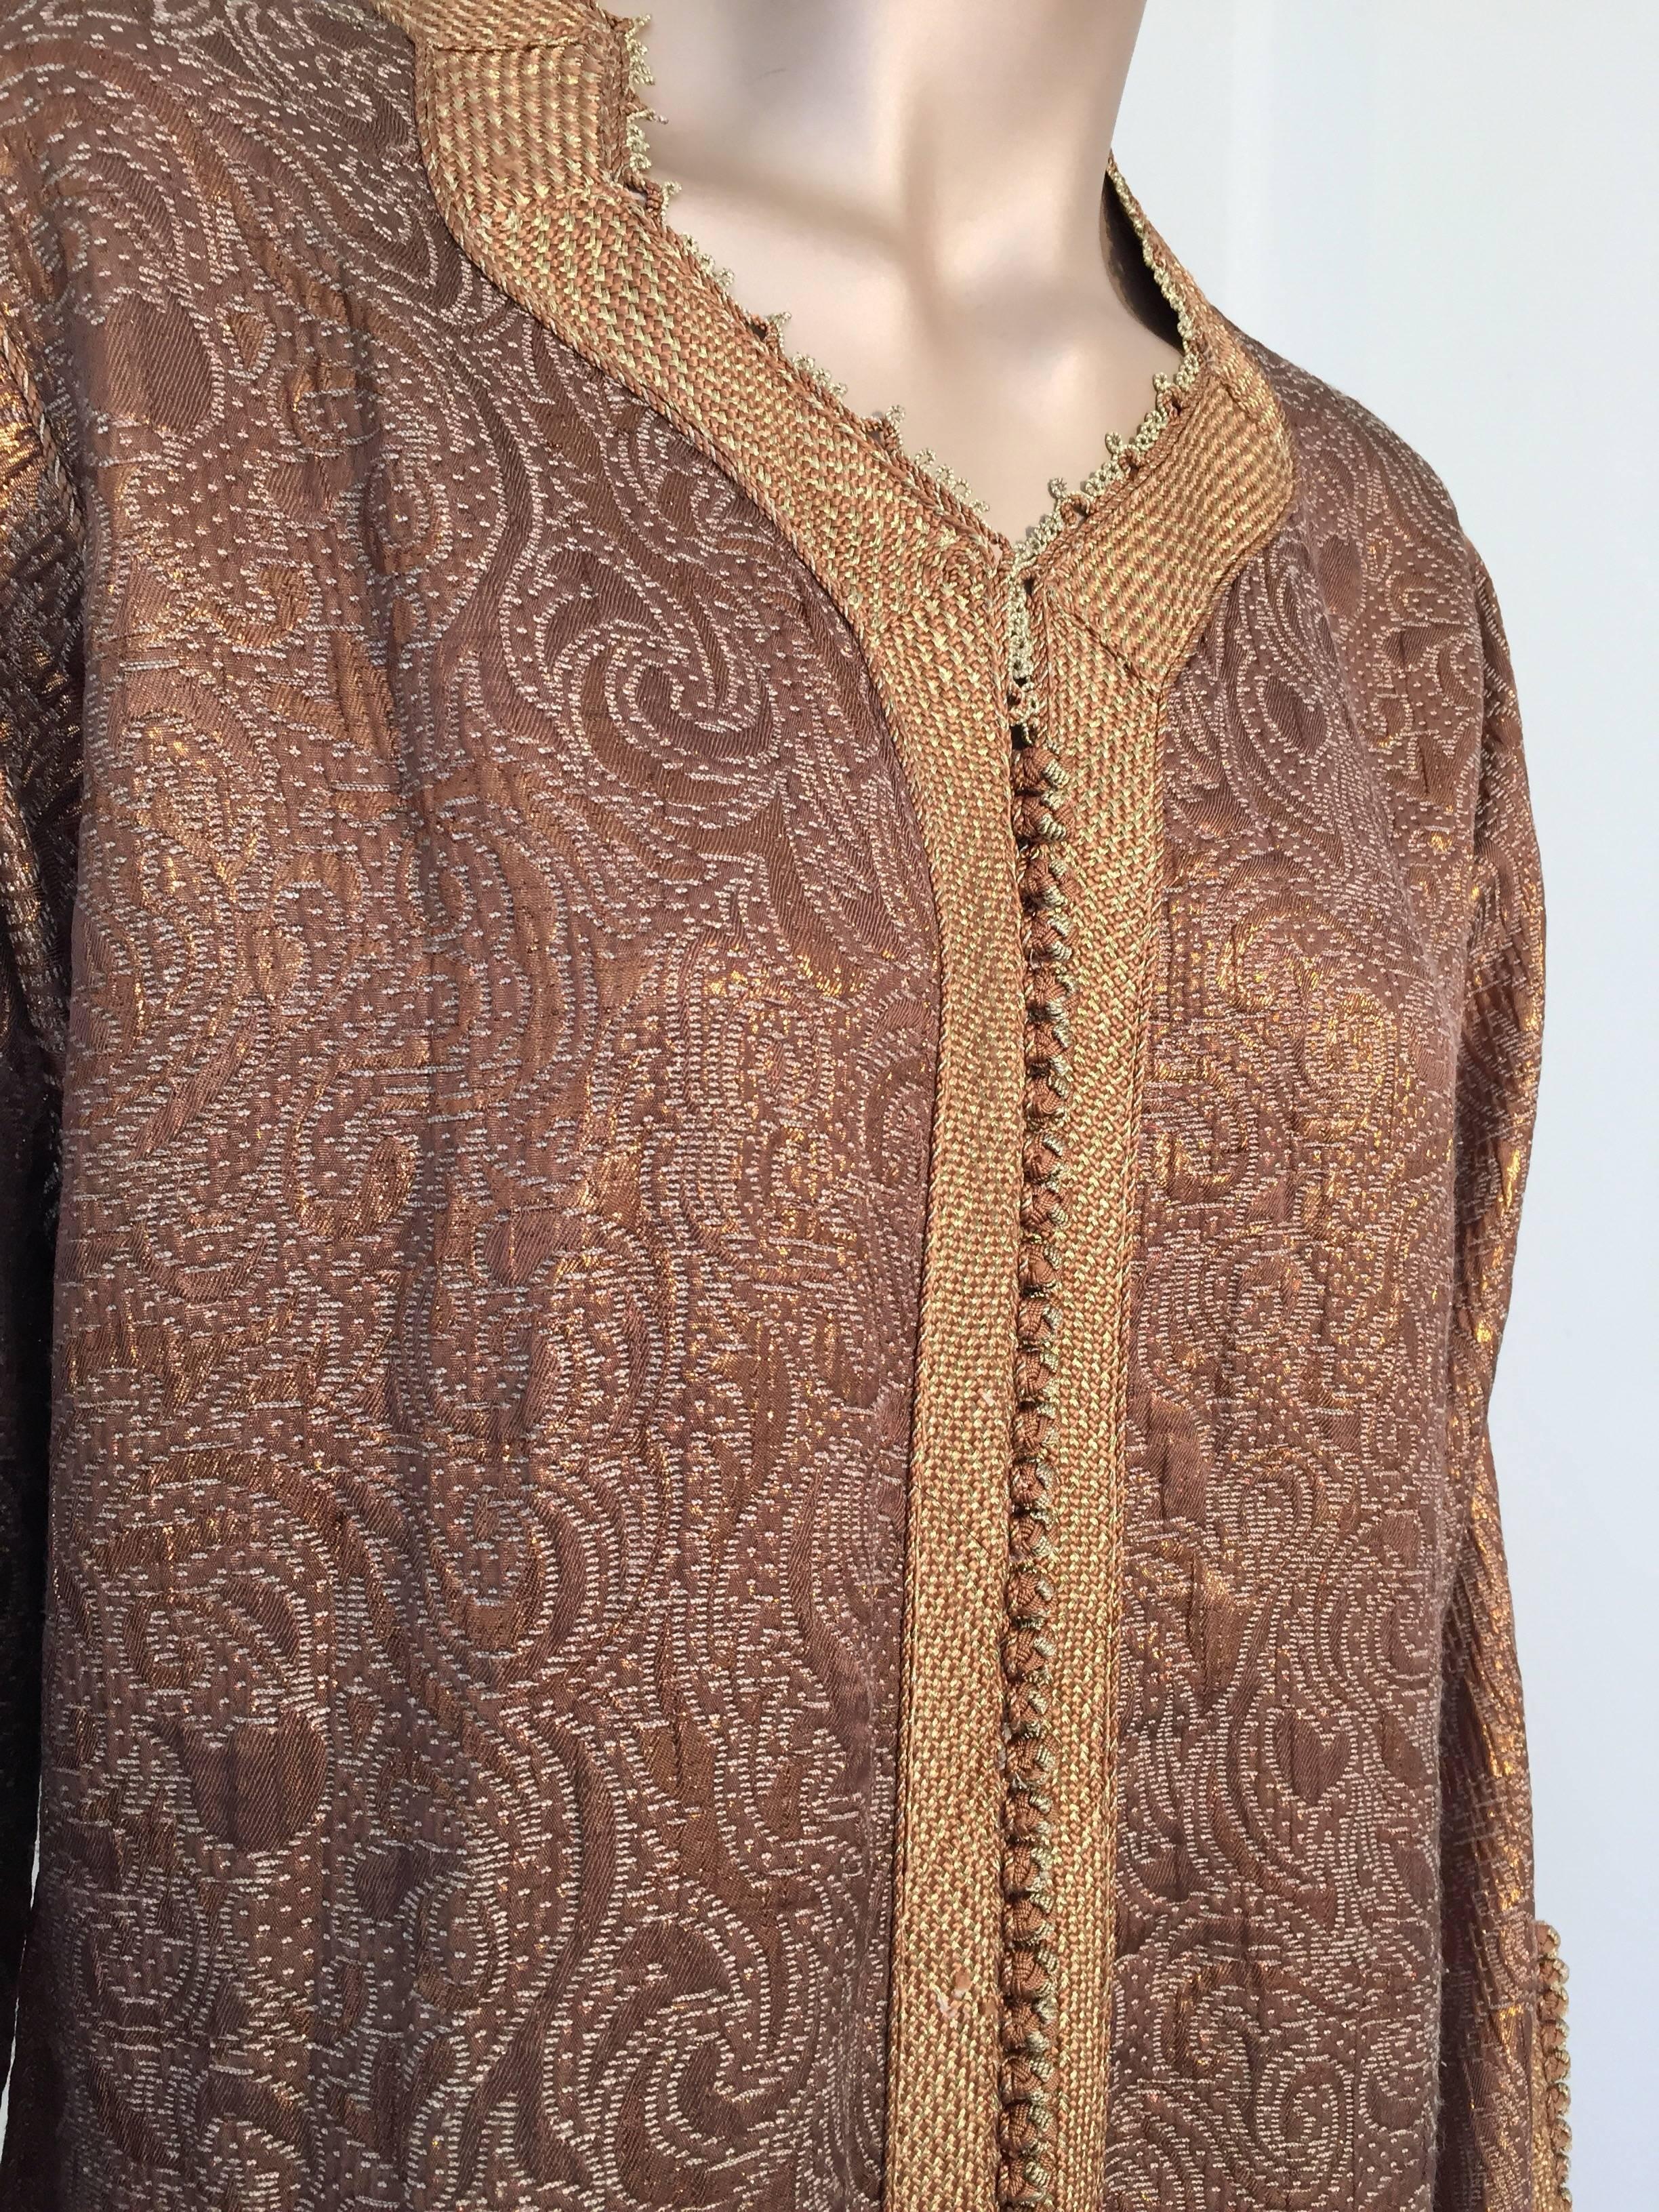 20th Century Moroccan Caftan 1970s, North Africa, Morocco Metallic Bronze and Gold Color